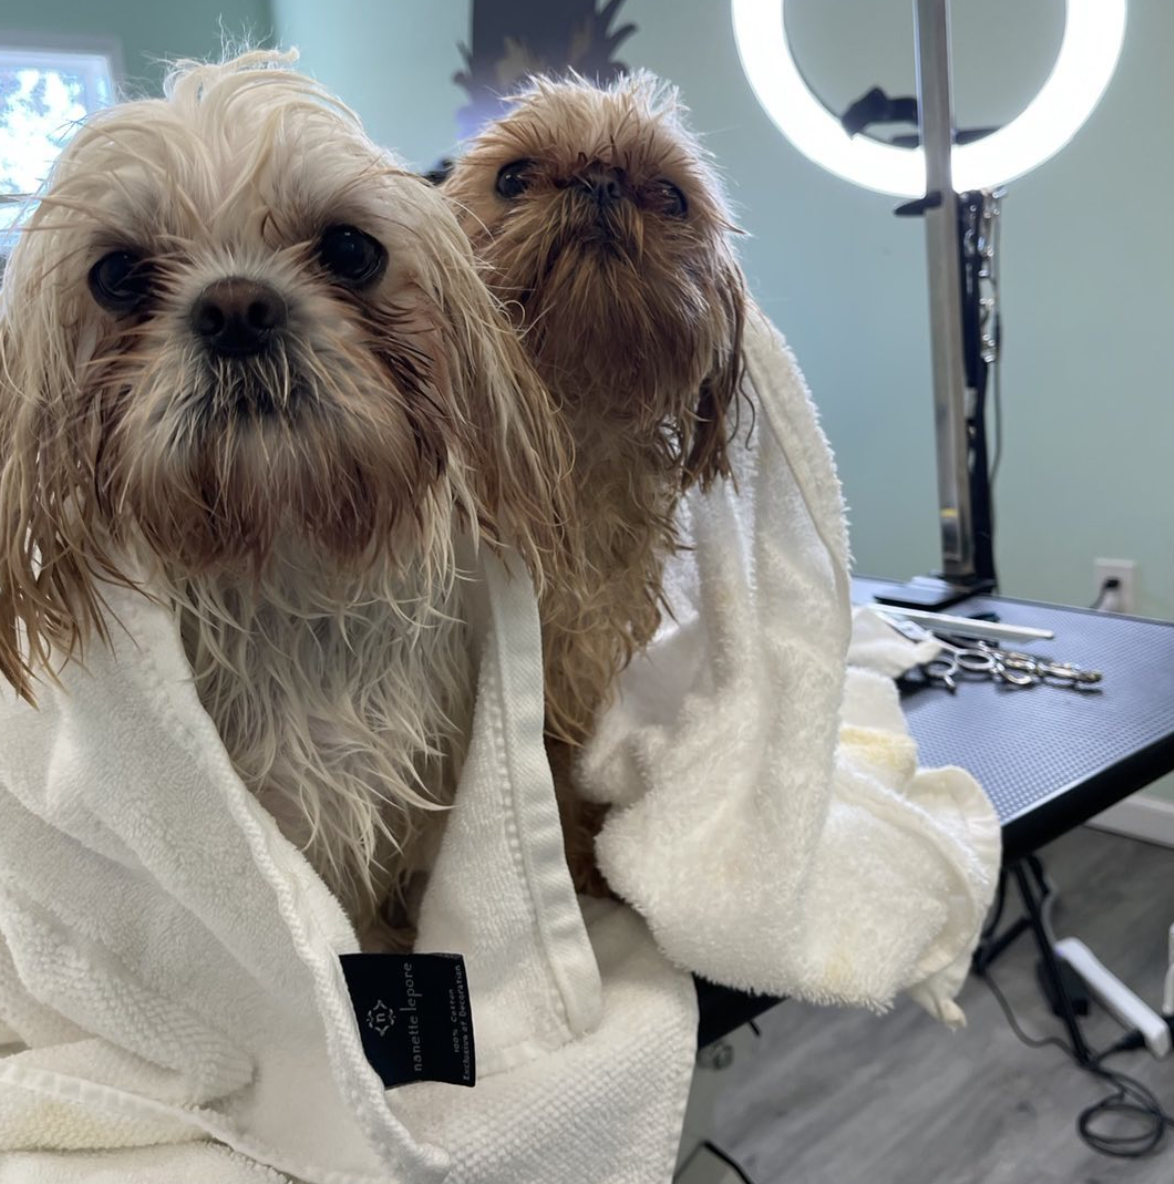 Dog Grooming Business for Sale in New Jersey